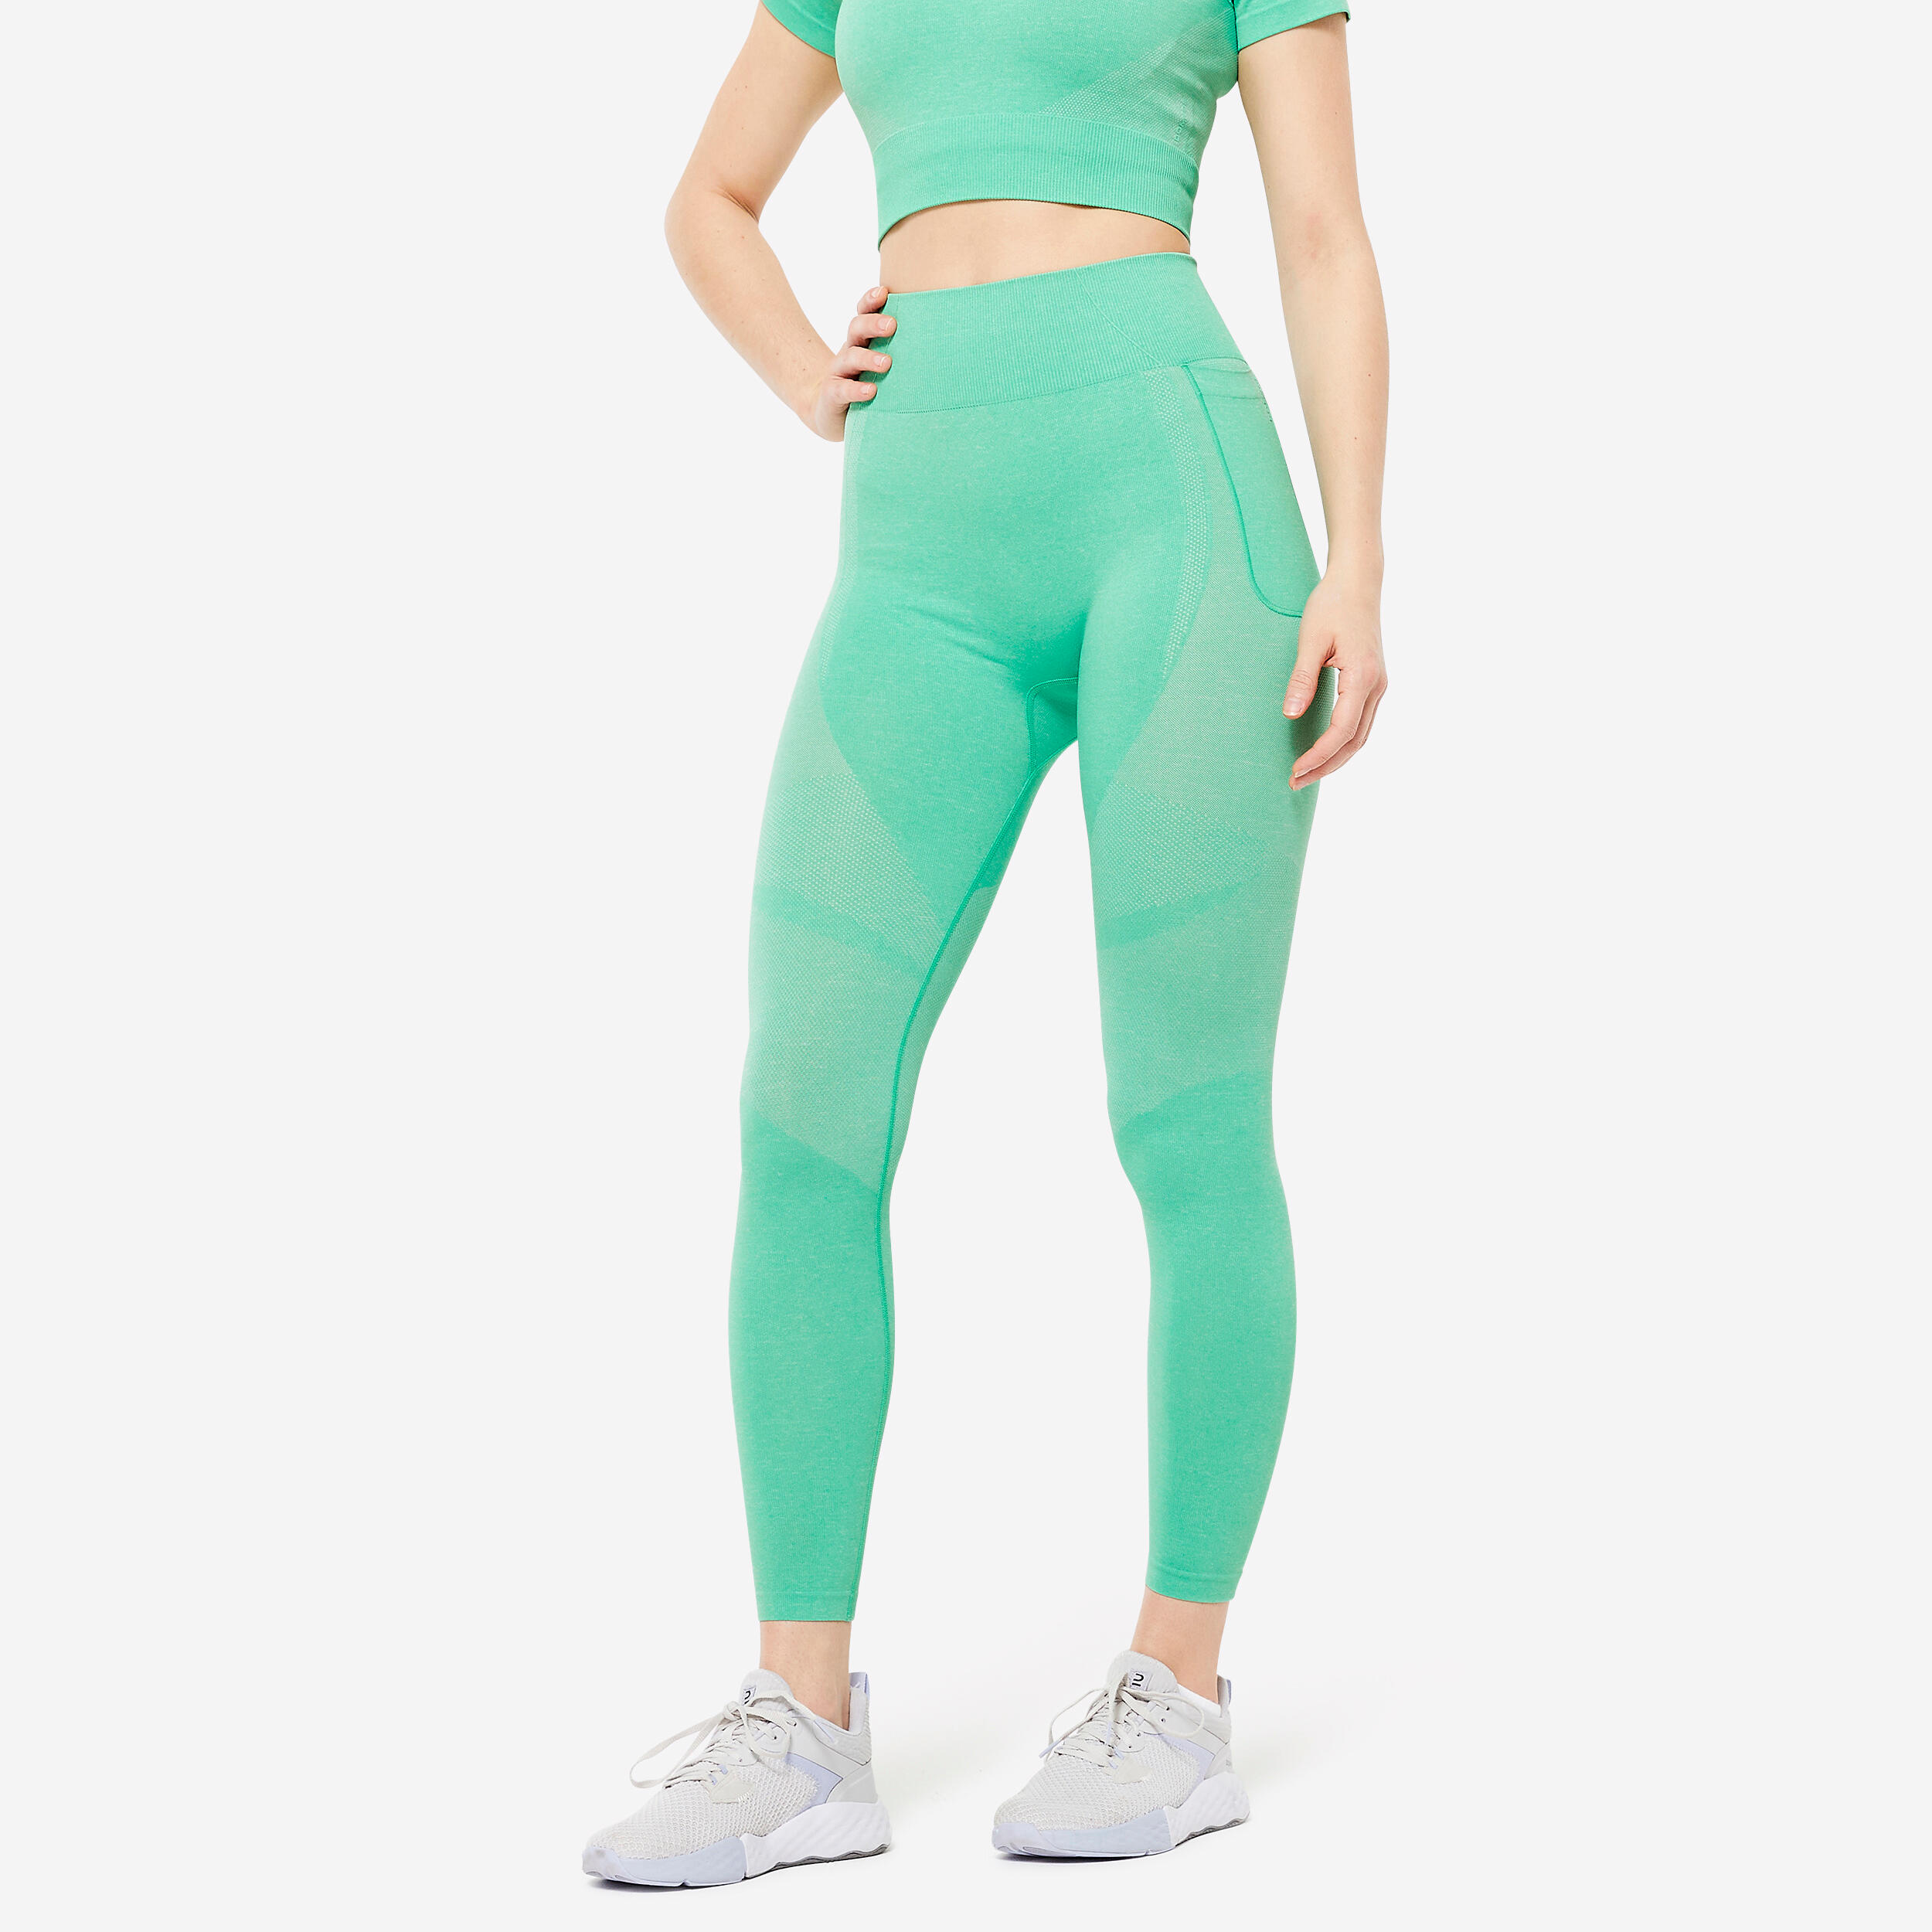 High-Waisted Seamless Fitness Leggings with Phone Pocket - Green 1/6